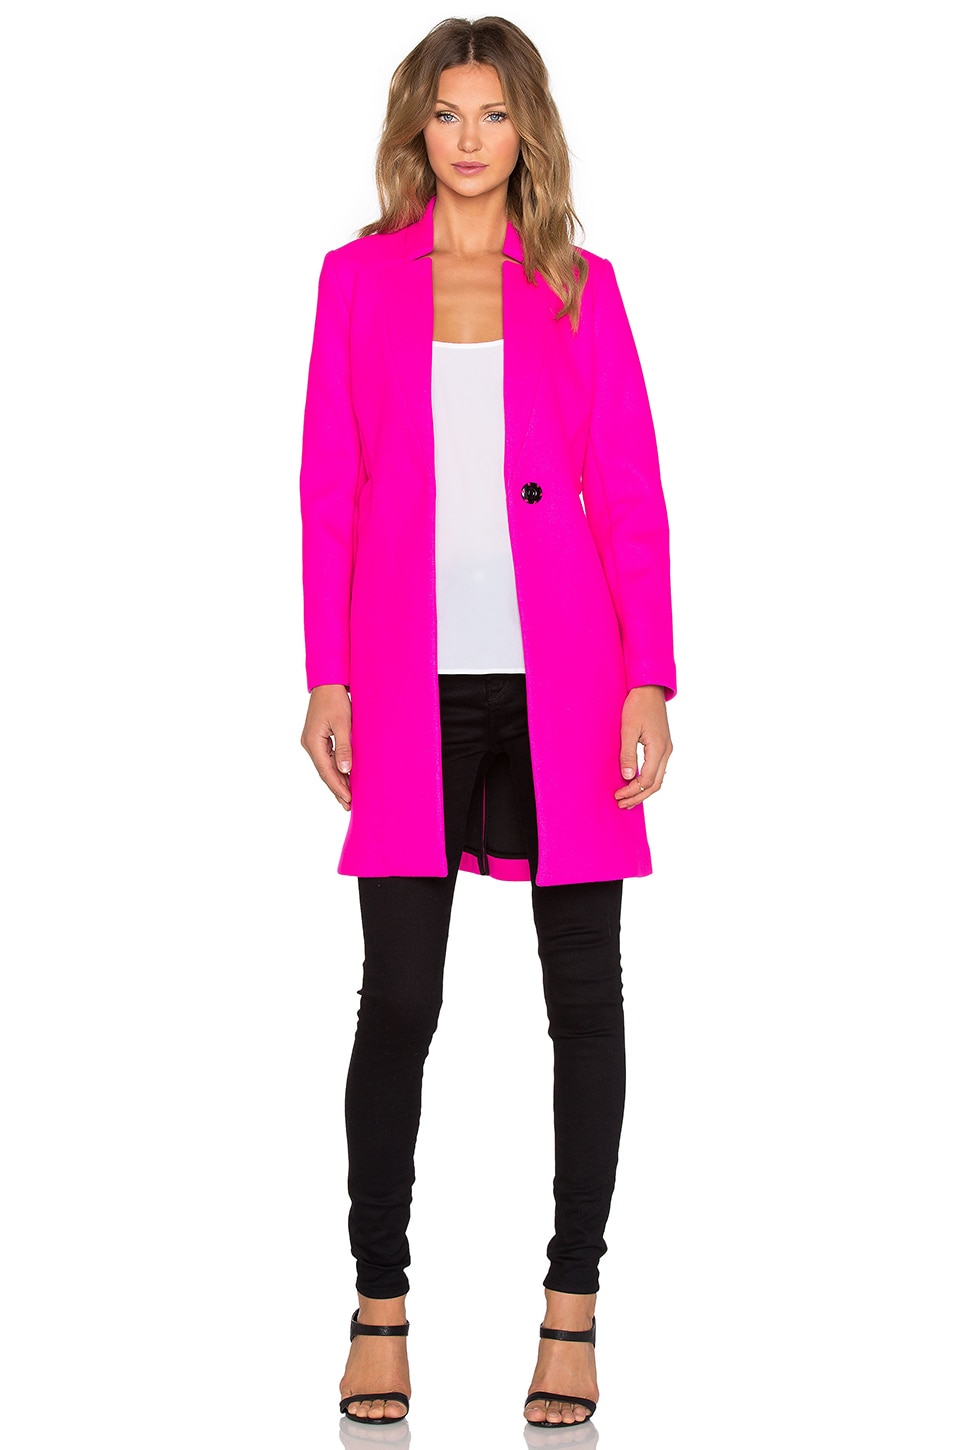 milly hot pink coat